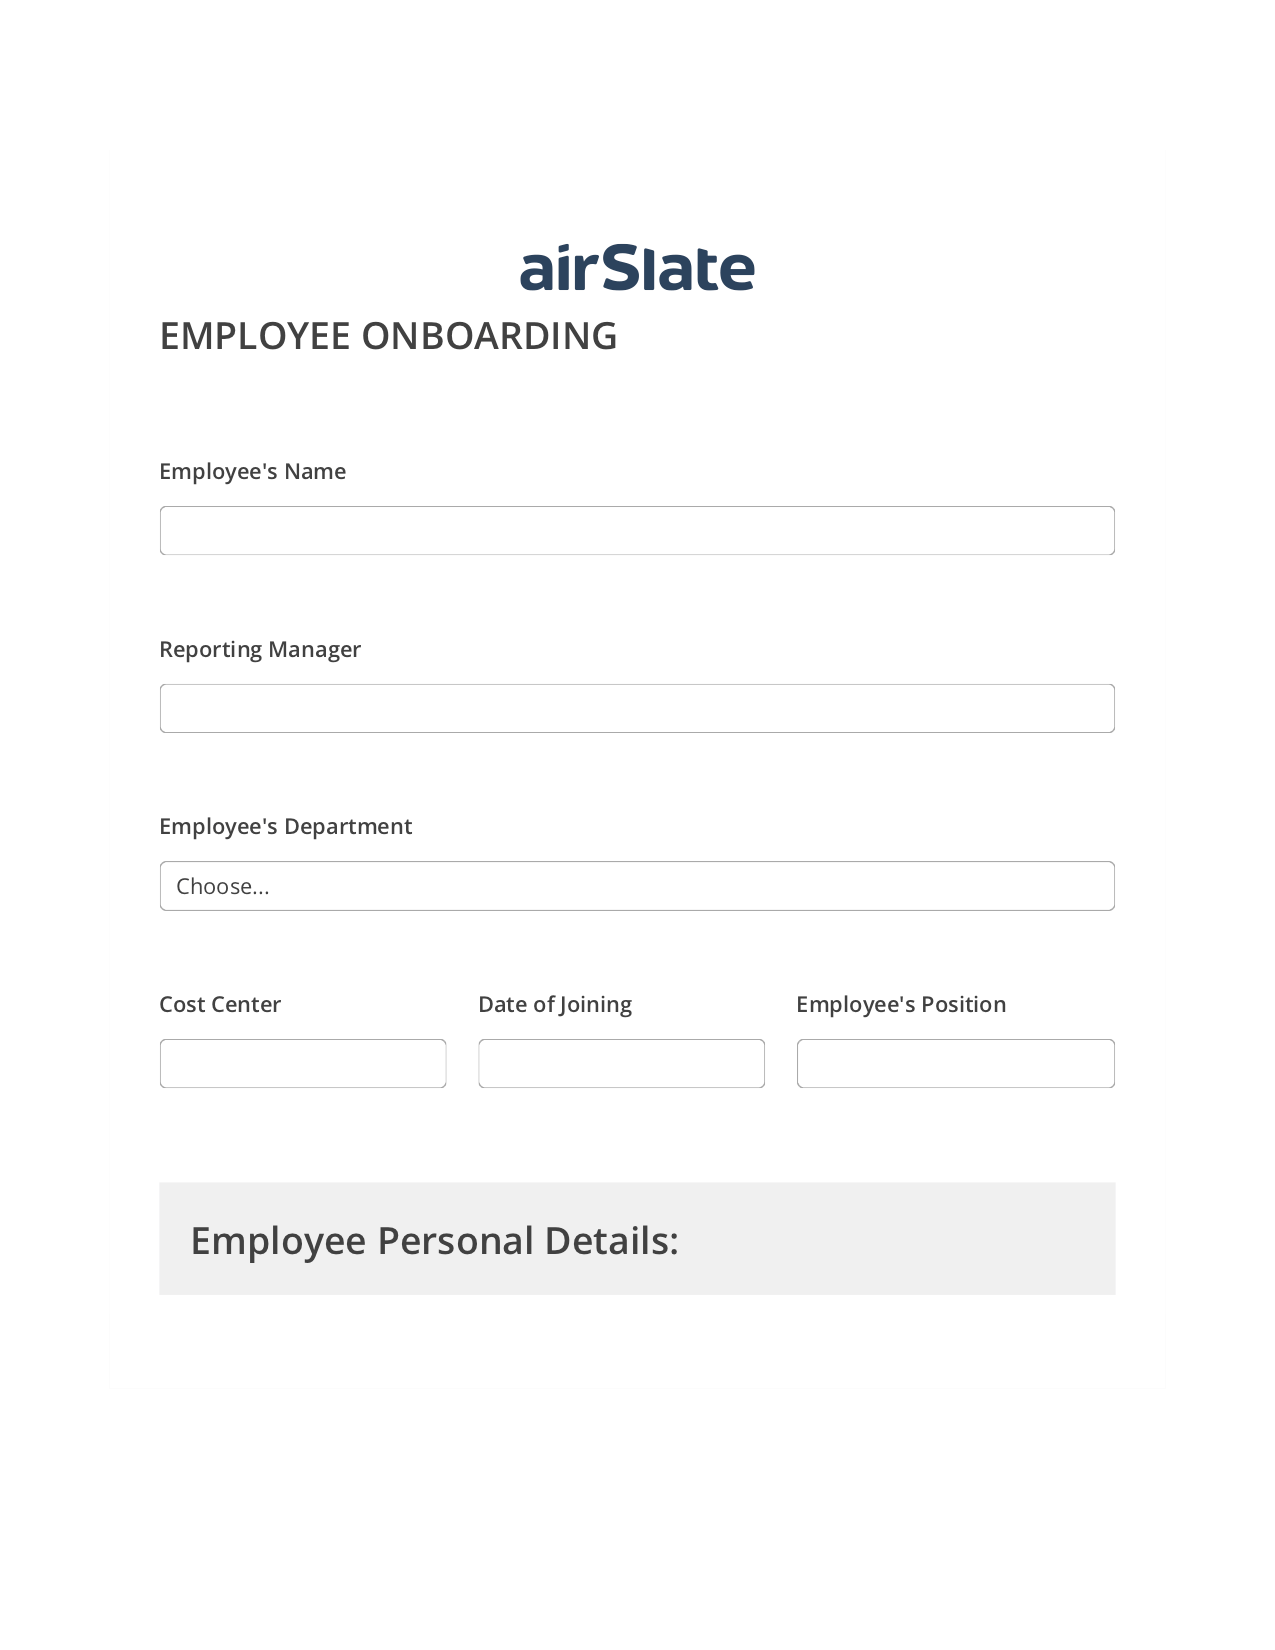 Employee Onboarding Workflow Prefill from NetSuite records, Create slate bot, Export to Excel 365 Bot